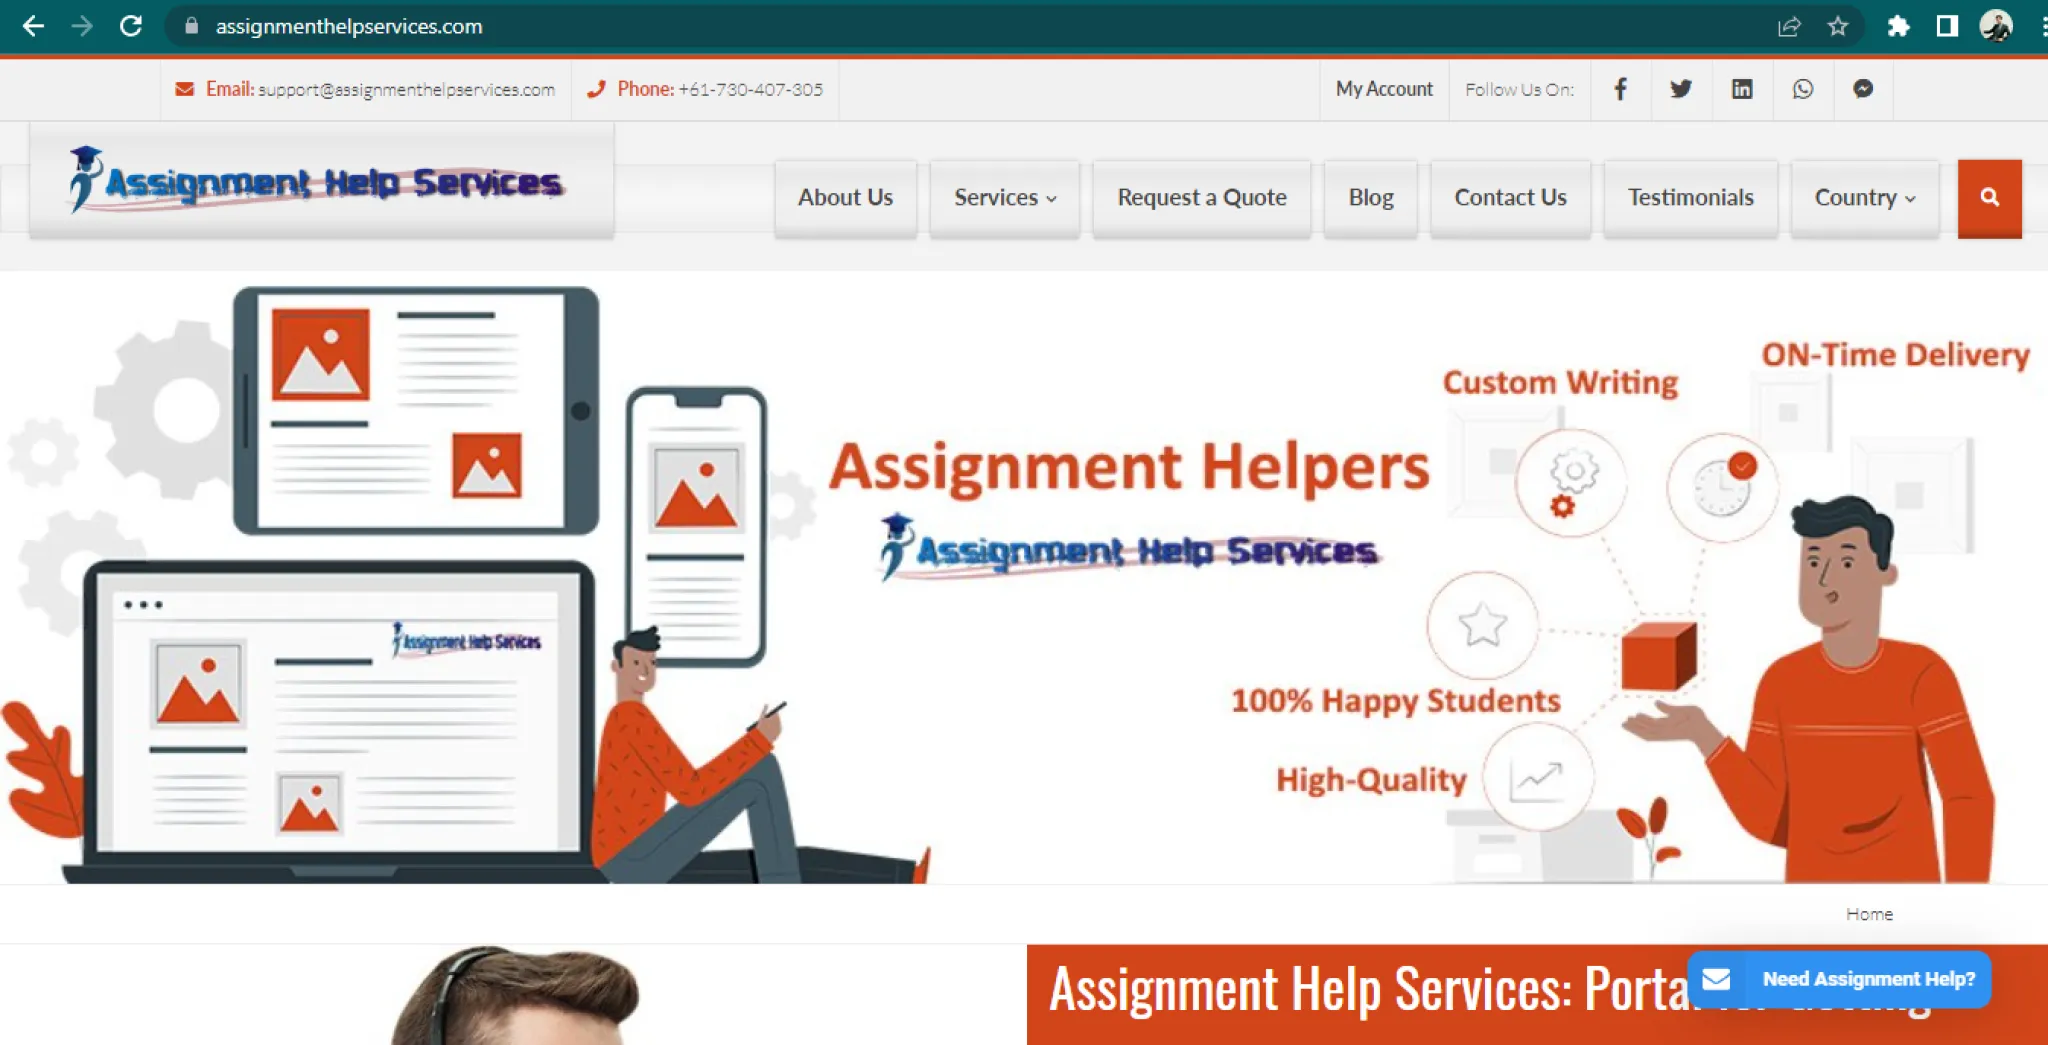 AssignmentHelpServices Review